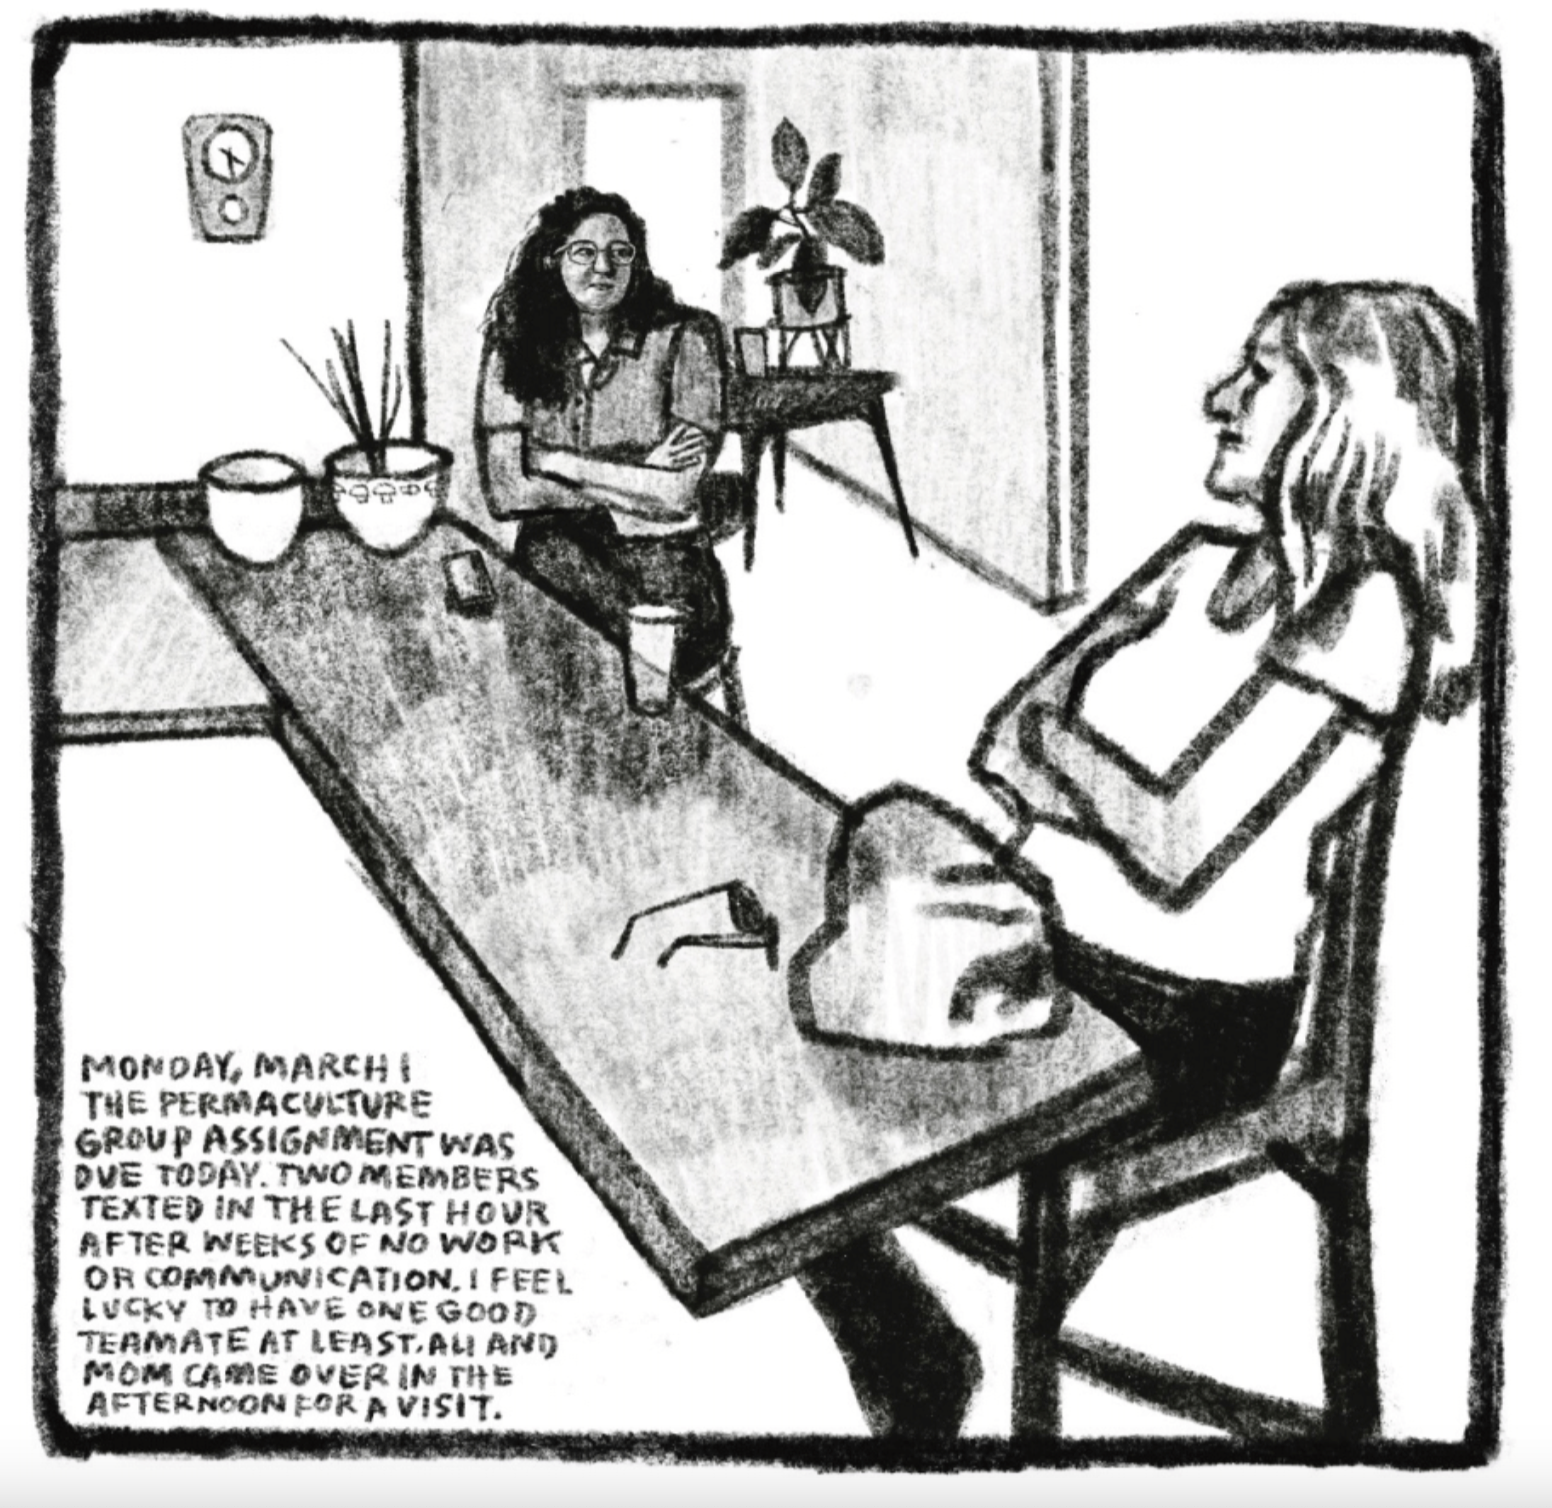 Hold Still Episode 11, Panel 1
Kim and another woman sitting a few feet apart at a bar-style counter, with arms crossed.
Bottom left corner reads: "MONDAY, MARCH 1
THE PERMACULTURE GROUP ASSIGNMENT WAS DUE TODAY. TWO MEMBERS TEXTED IN THE LAST HOUR AFTER WEEKS OF NO WORK OR COMMUNICATION. I FEEL LUCKY TO HAVE ONE GOOD TEAMATE AT LEAST. ALI AND MOM CAME OVER IN THE AFTERNOON FOR A VISIT."